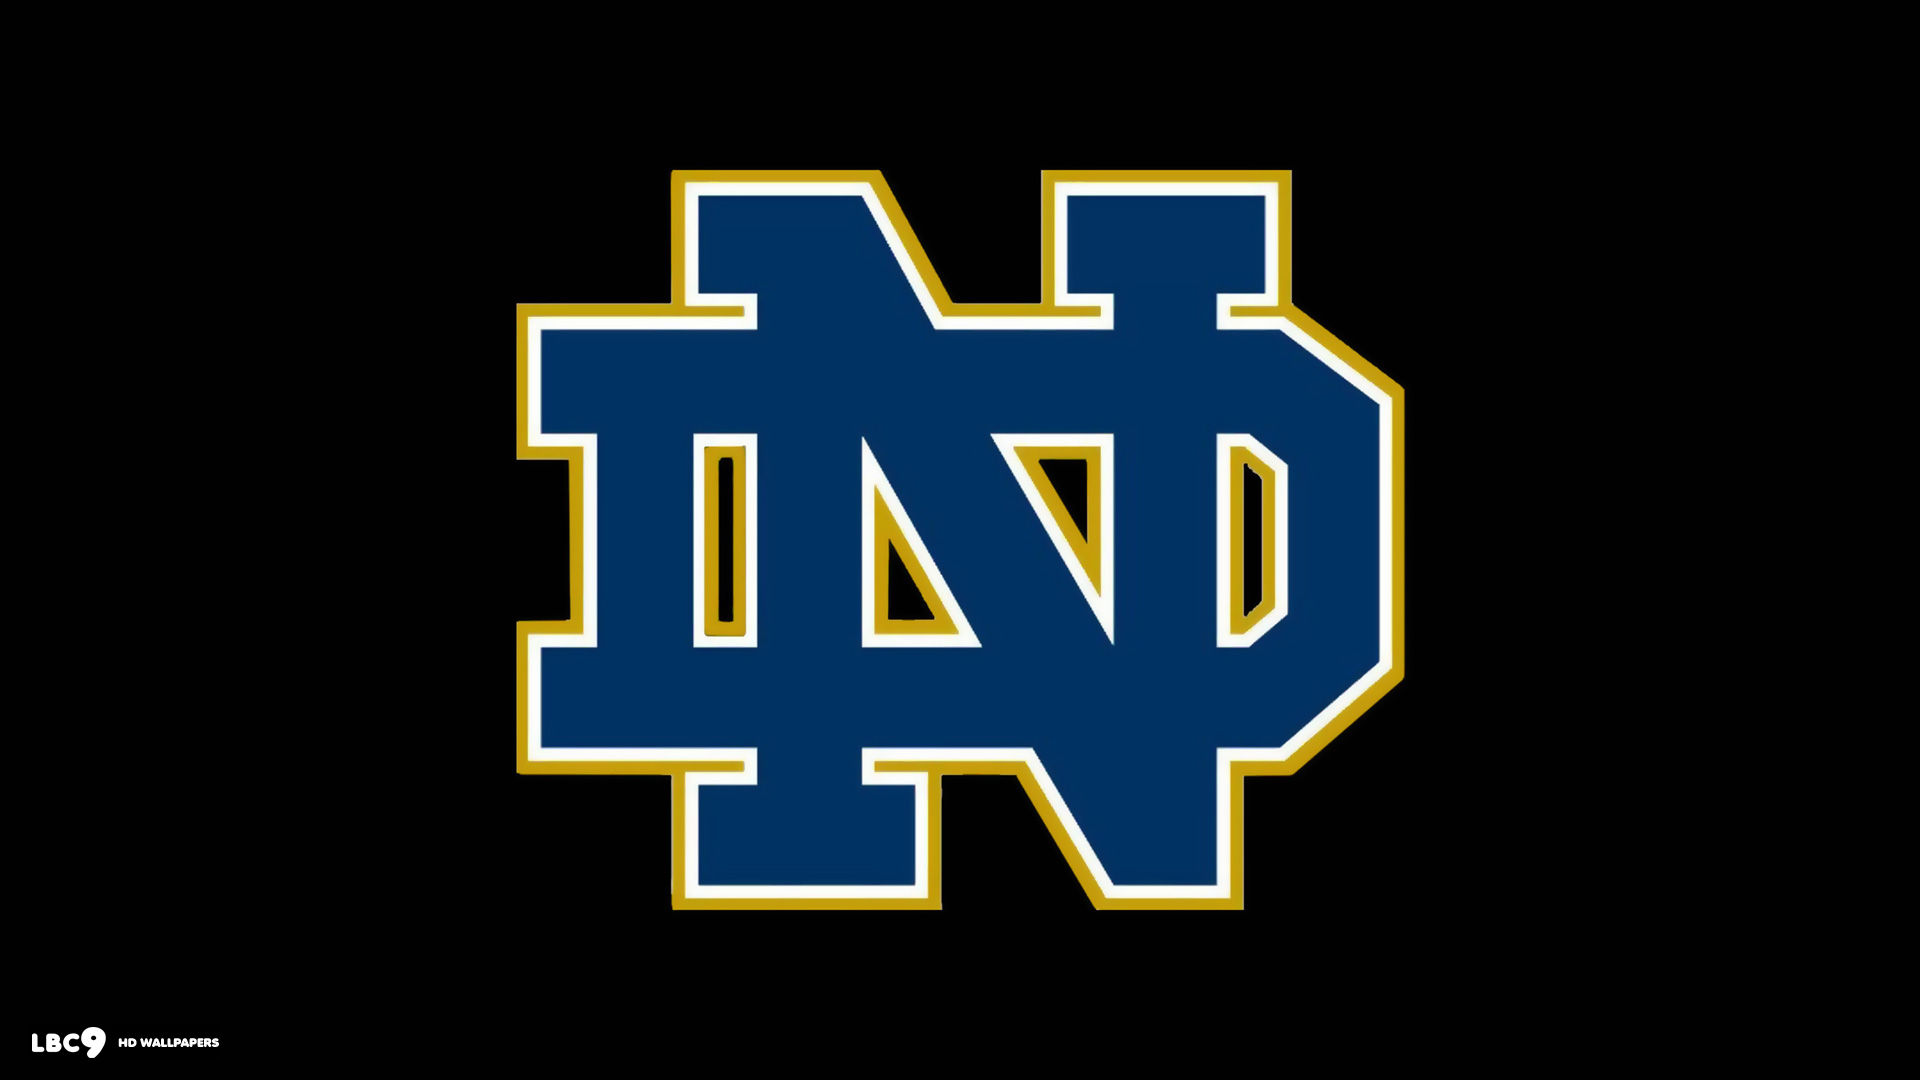 Notre dame backgrounds